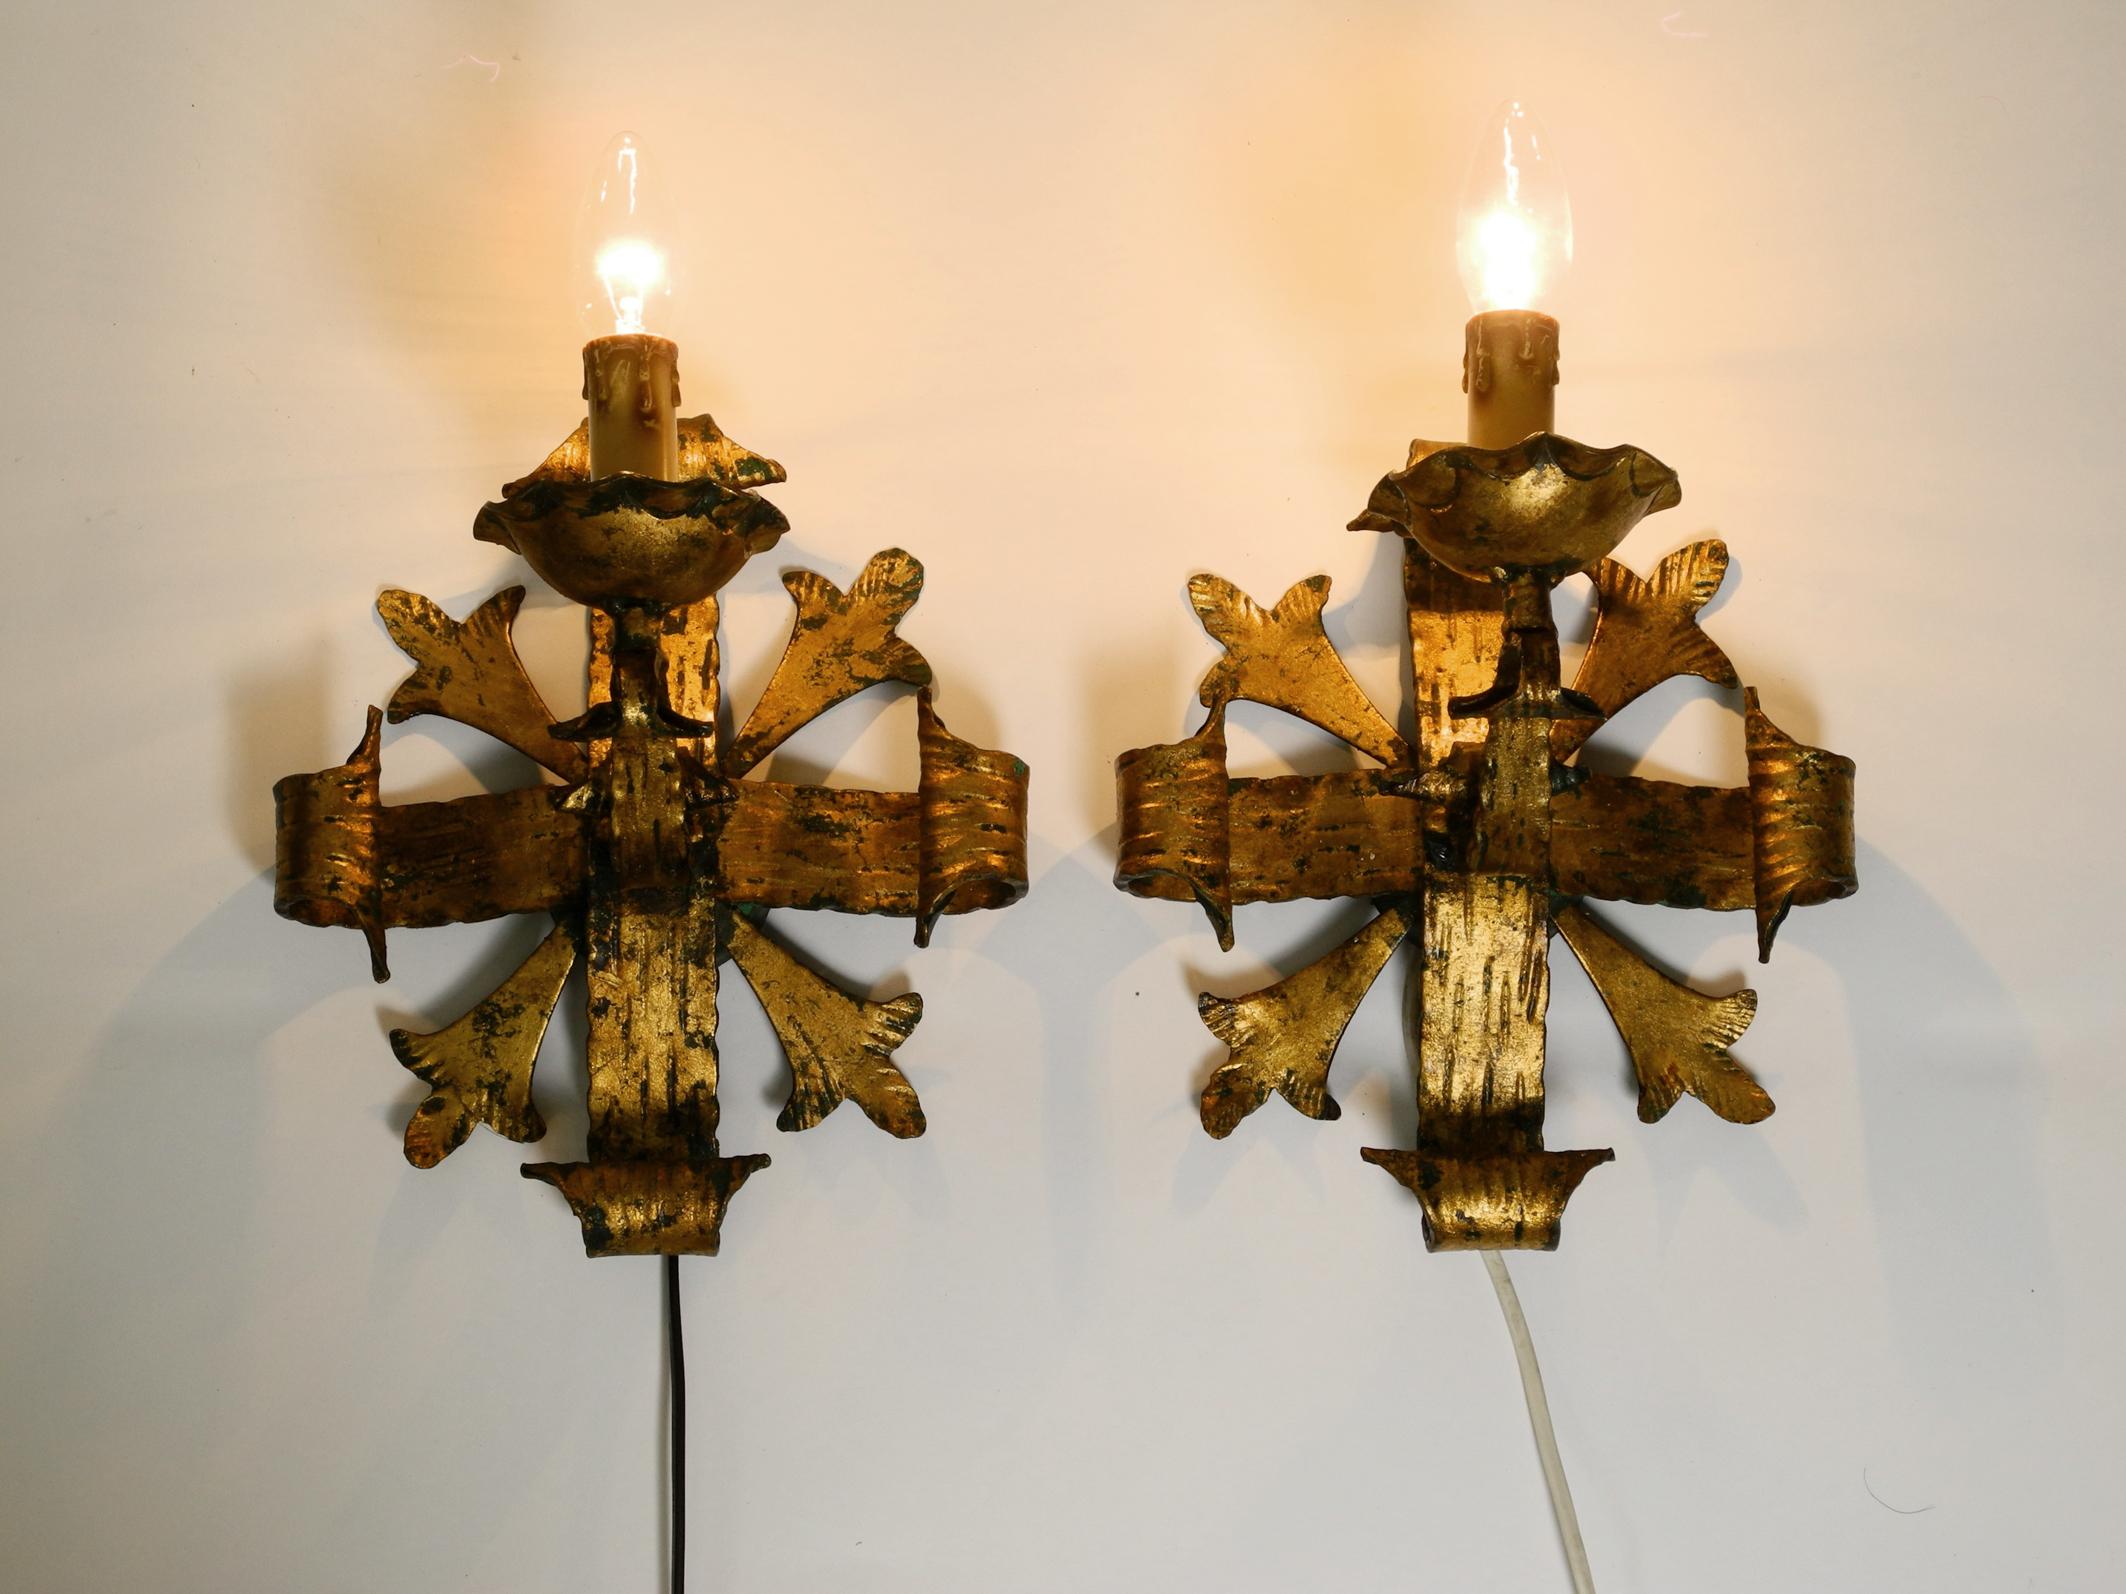 Pair of beautiful 1960's gold plated sconces.
Beautiful Brutalist design with many details. Very high quality processed.
Entire lamp is made of gilded heavy iron.
All parts complete. No damage and nothing broken.
Great patina. In some places the